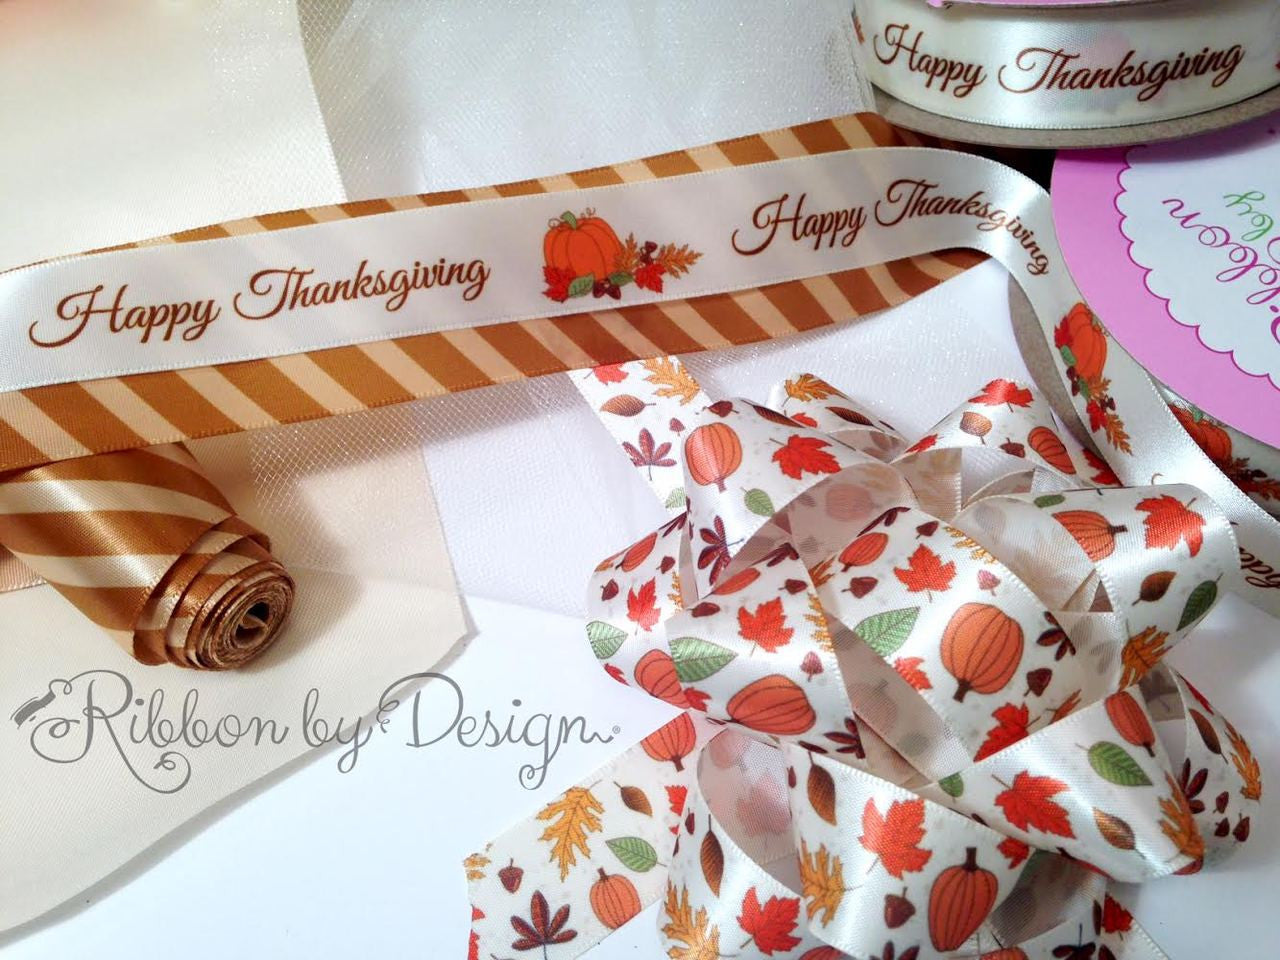 Our Thanksgiving ribbon works so well in designing with our other Fall patterns!